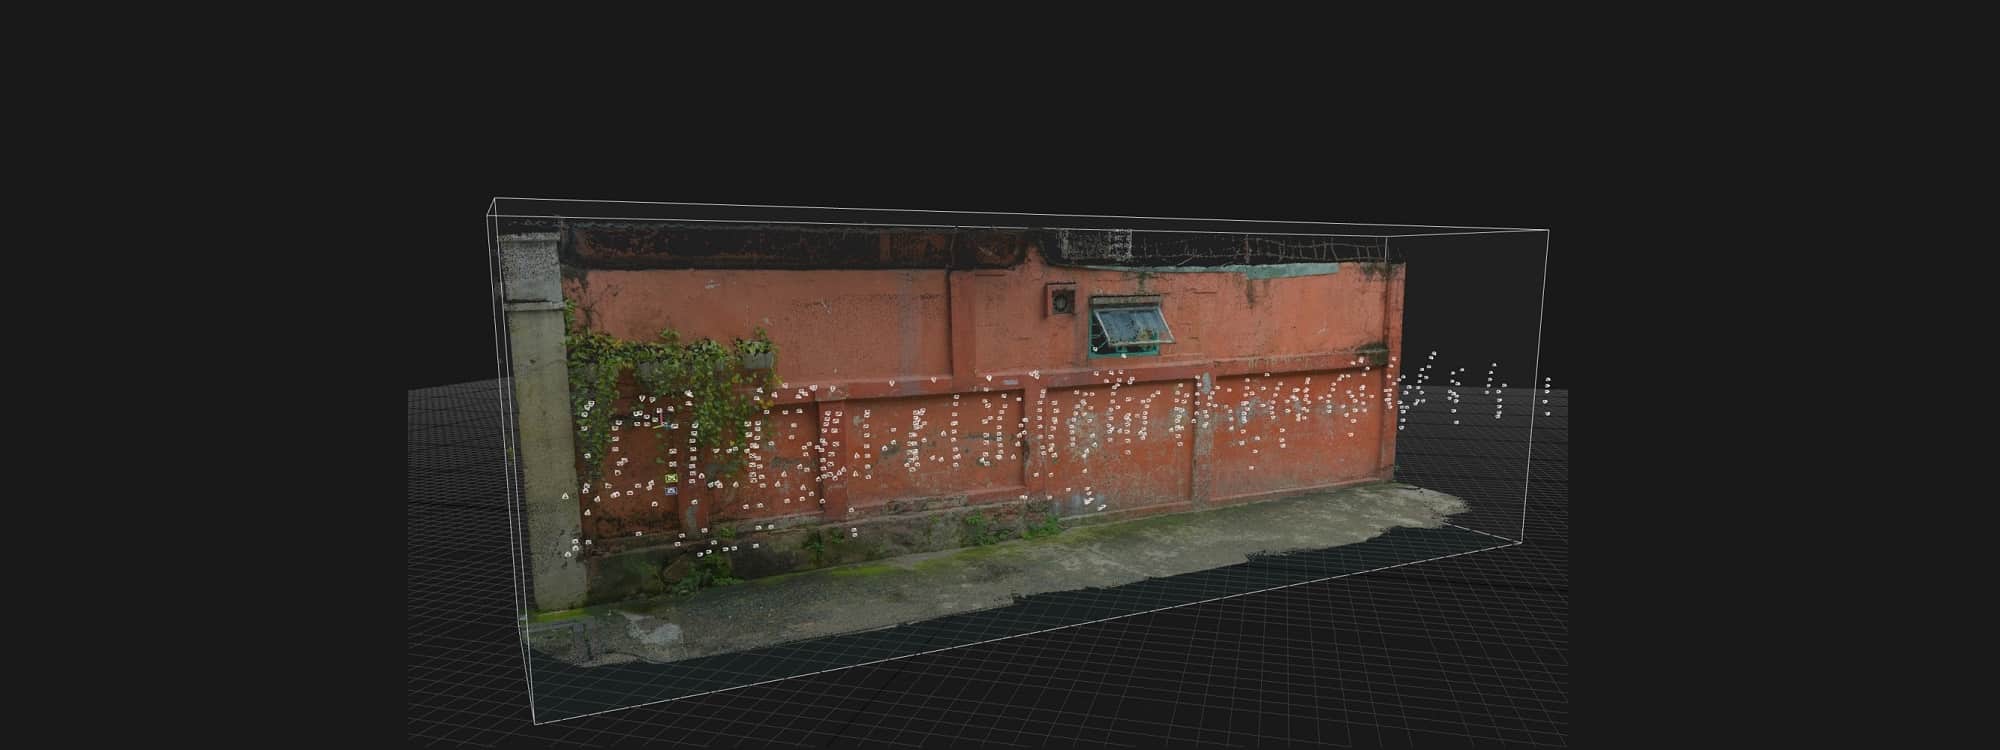 Expert Talks: Harnessing Photogrammetry and Creating Virtual Worlds at Sparx*